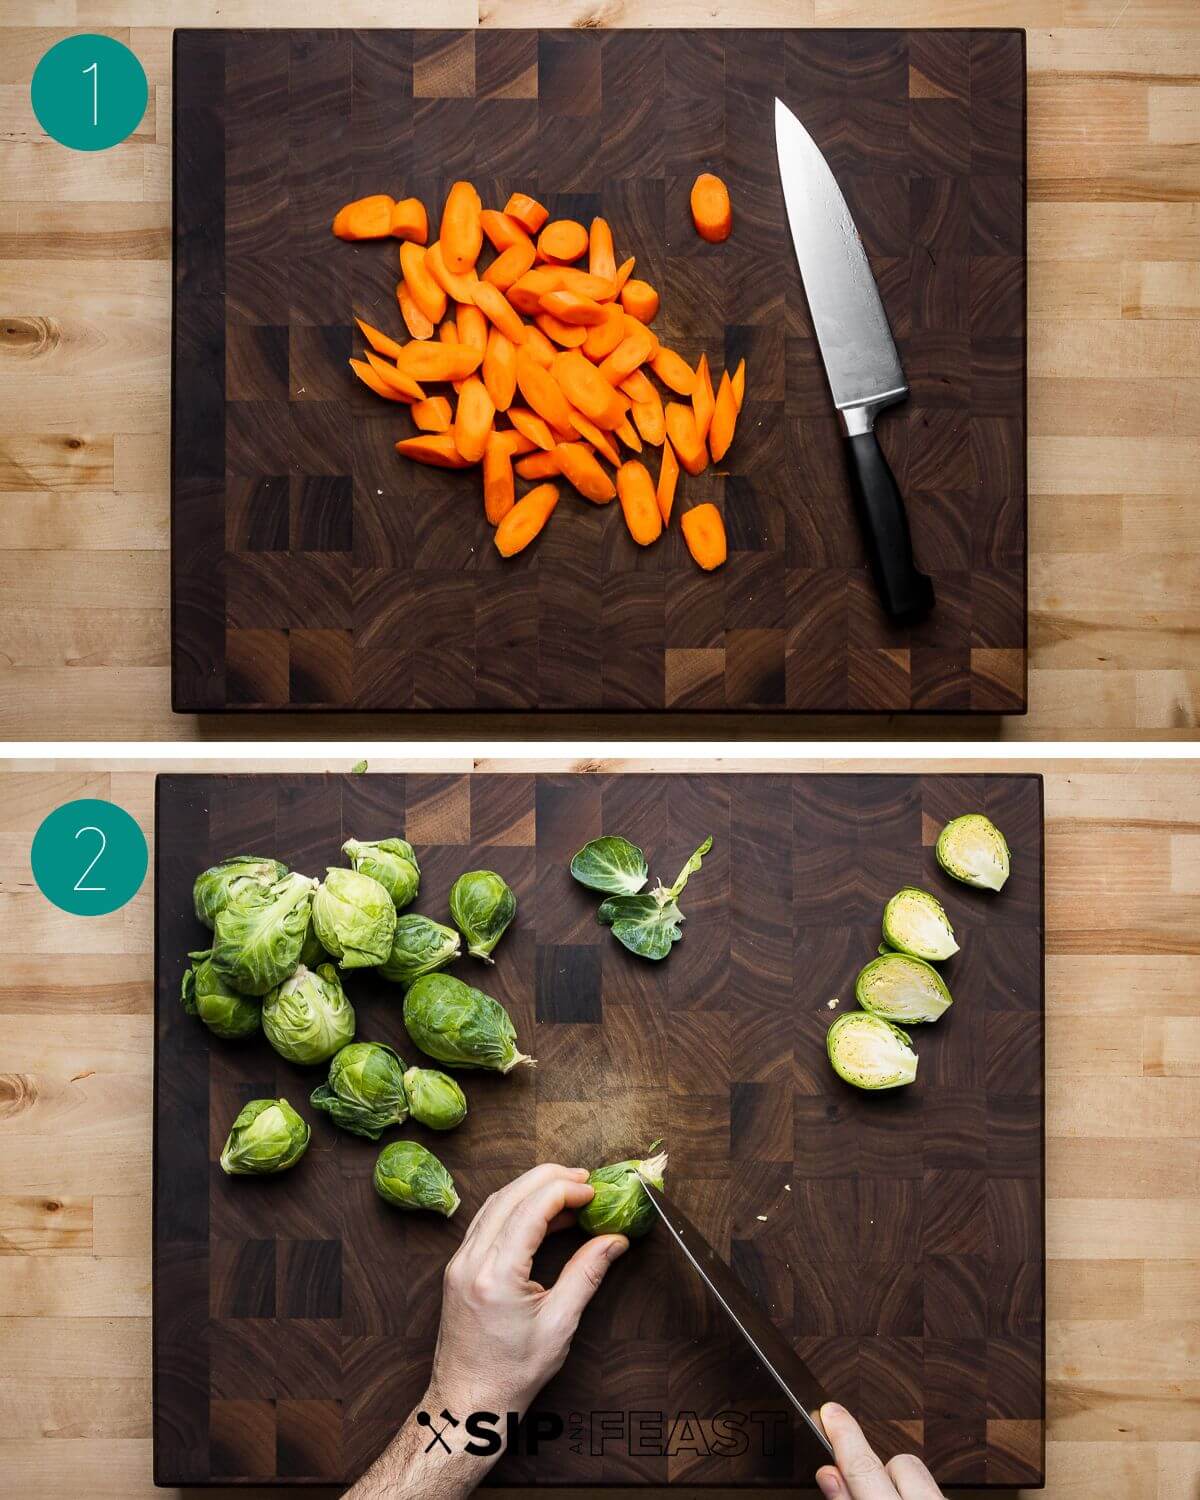 Roasted brussels sprouts and carrots recipe process shot collage group number one.